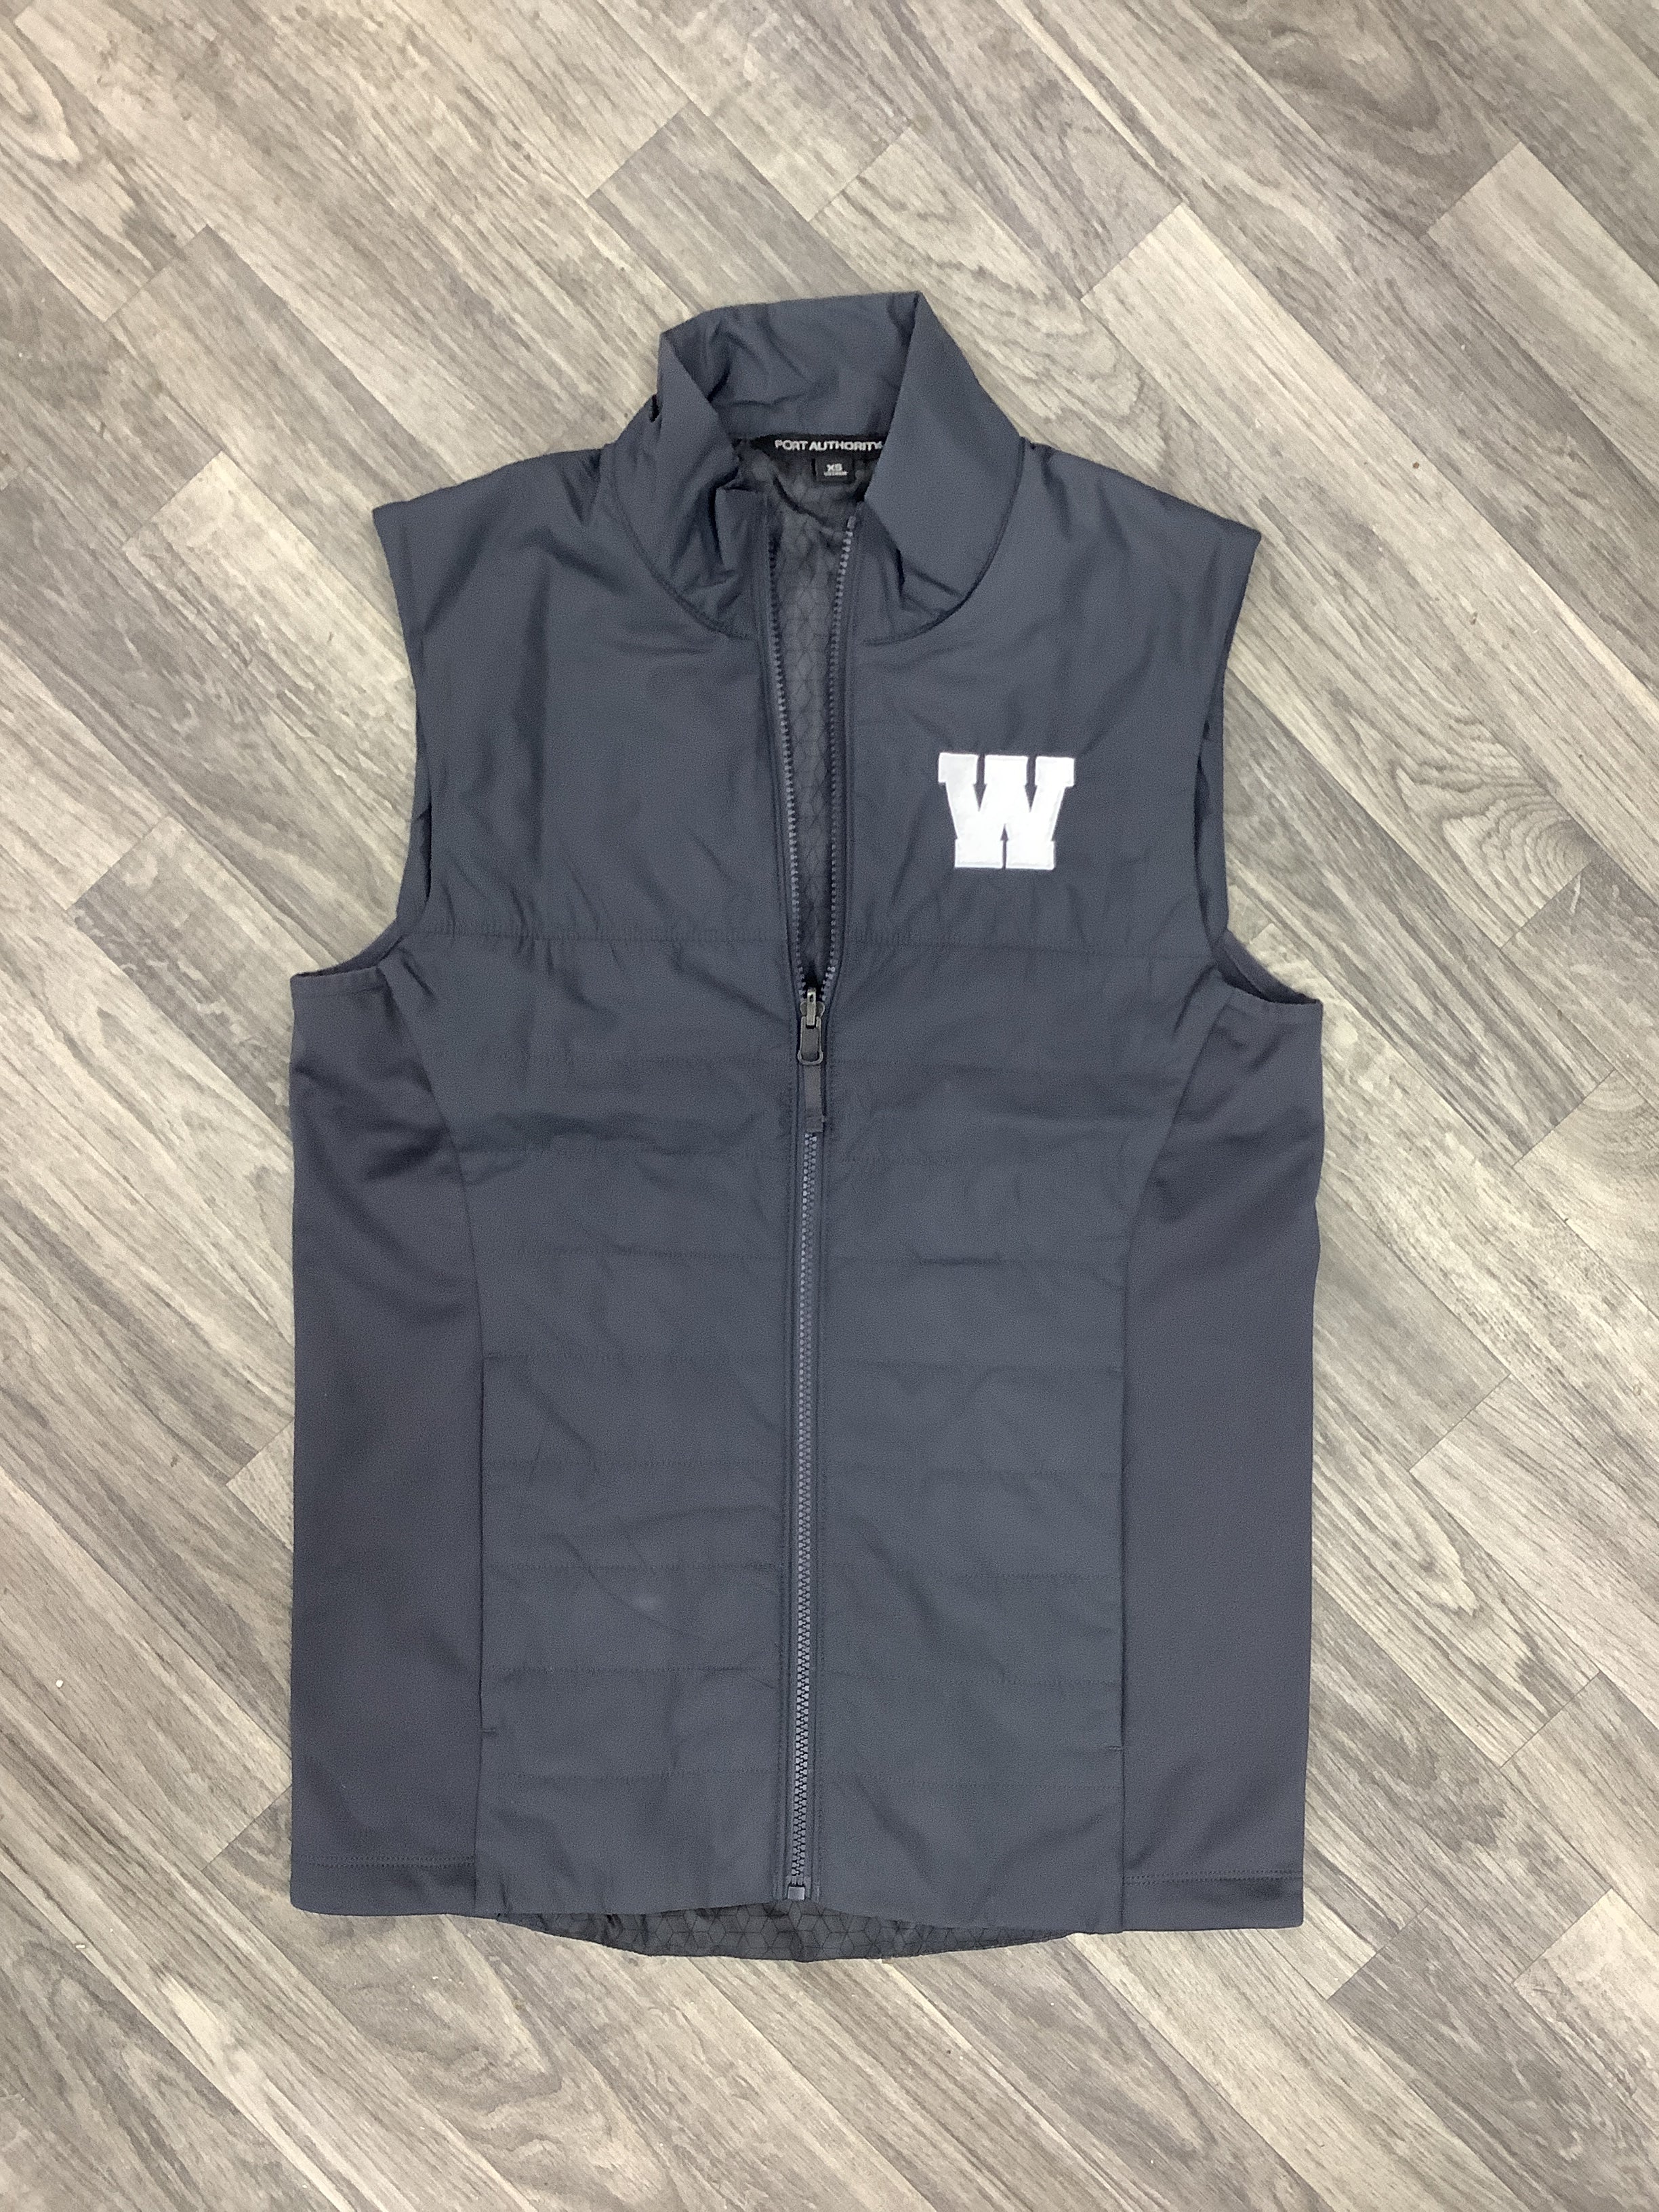 'W' Graphite Embroidered Insulted Vest